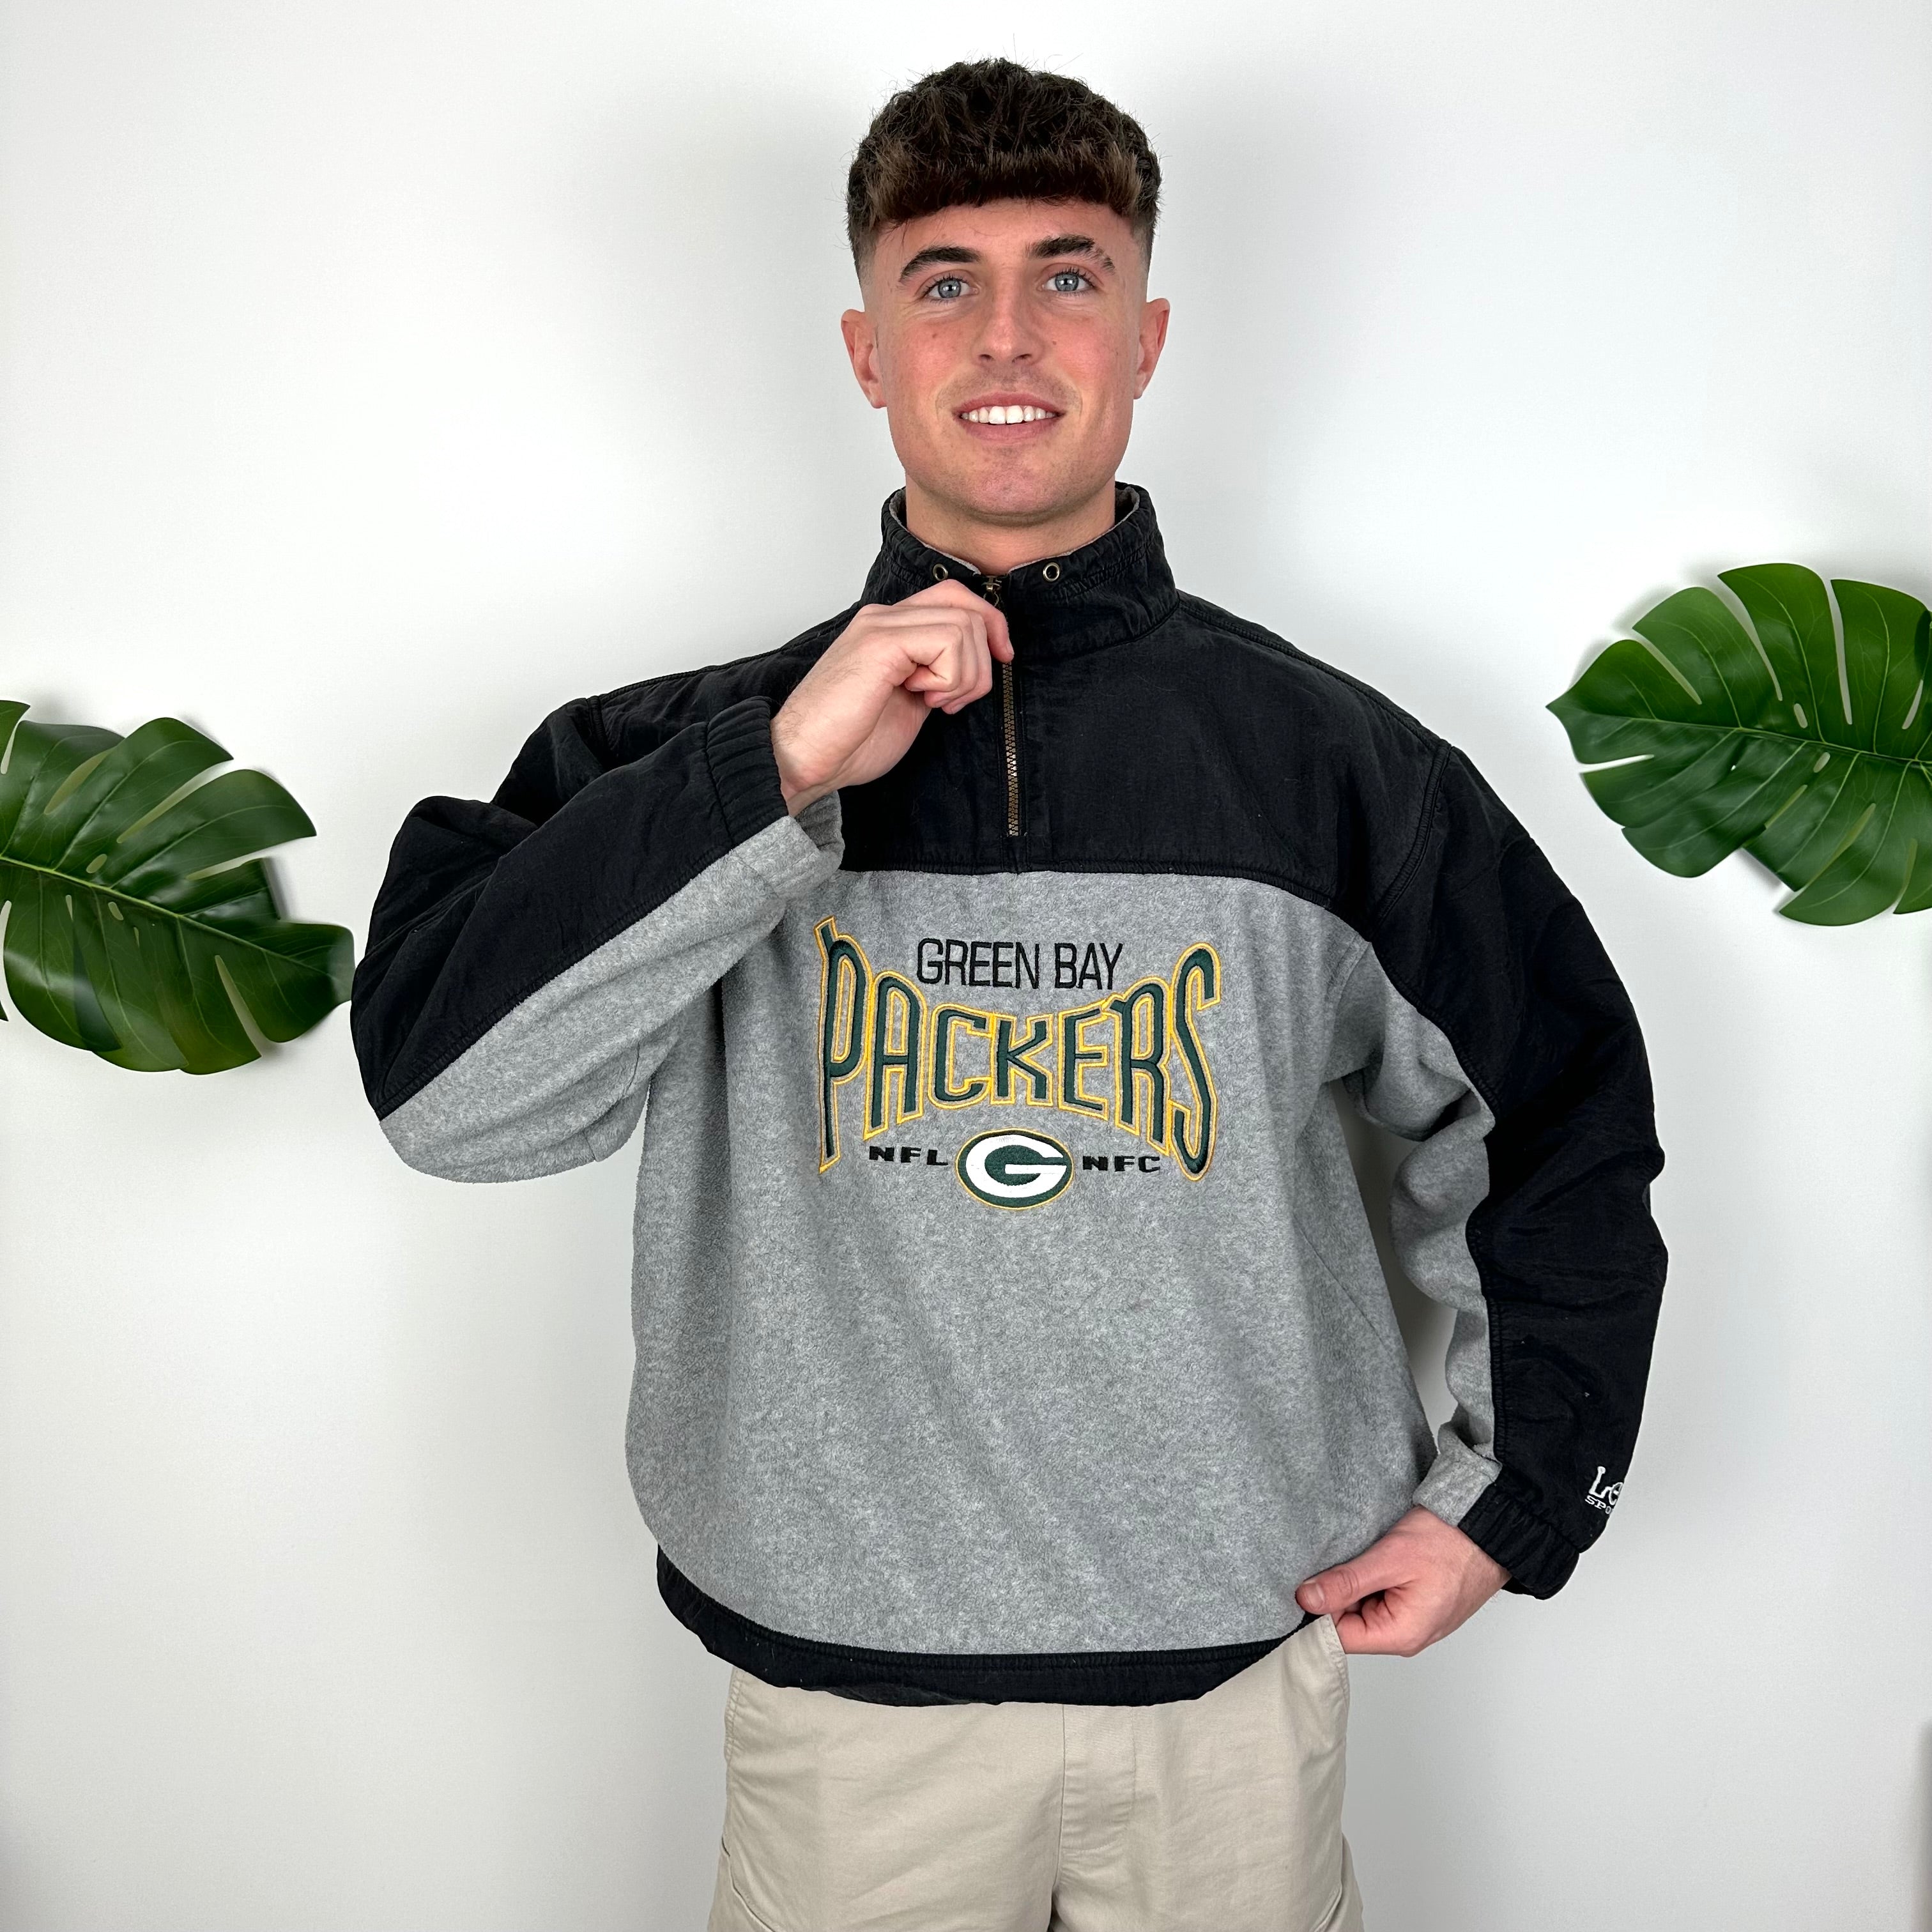 Green Bay Packers RARE Black & Grey Embroidered Spell Out Quarter Zip Sweatshirt (L)